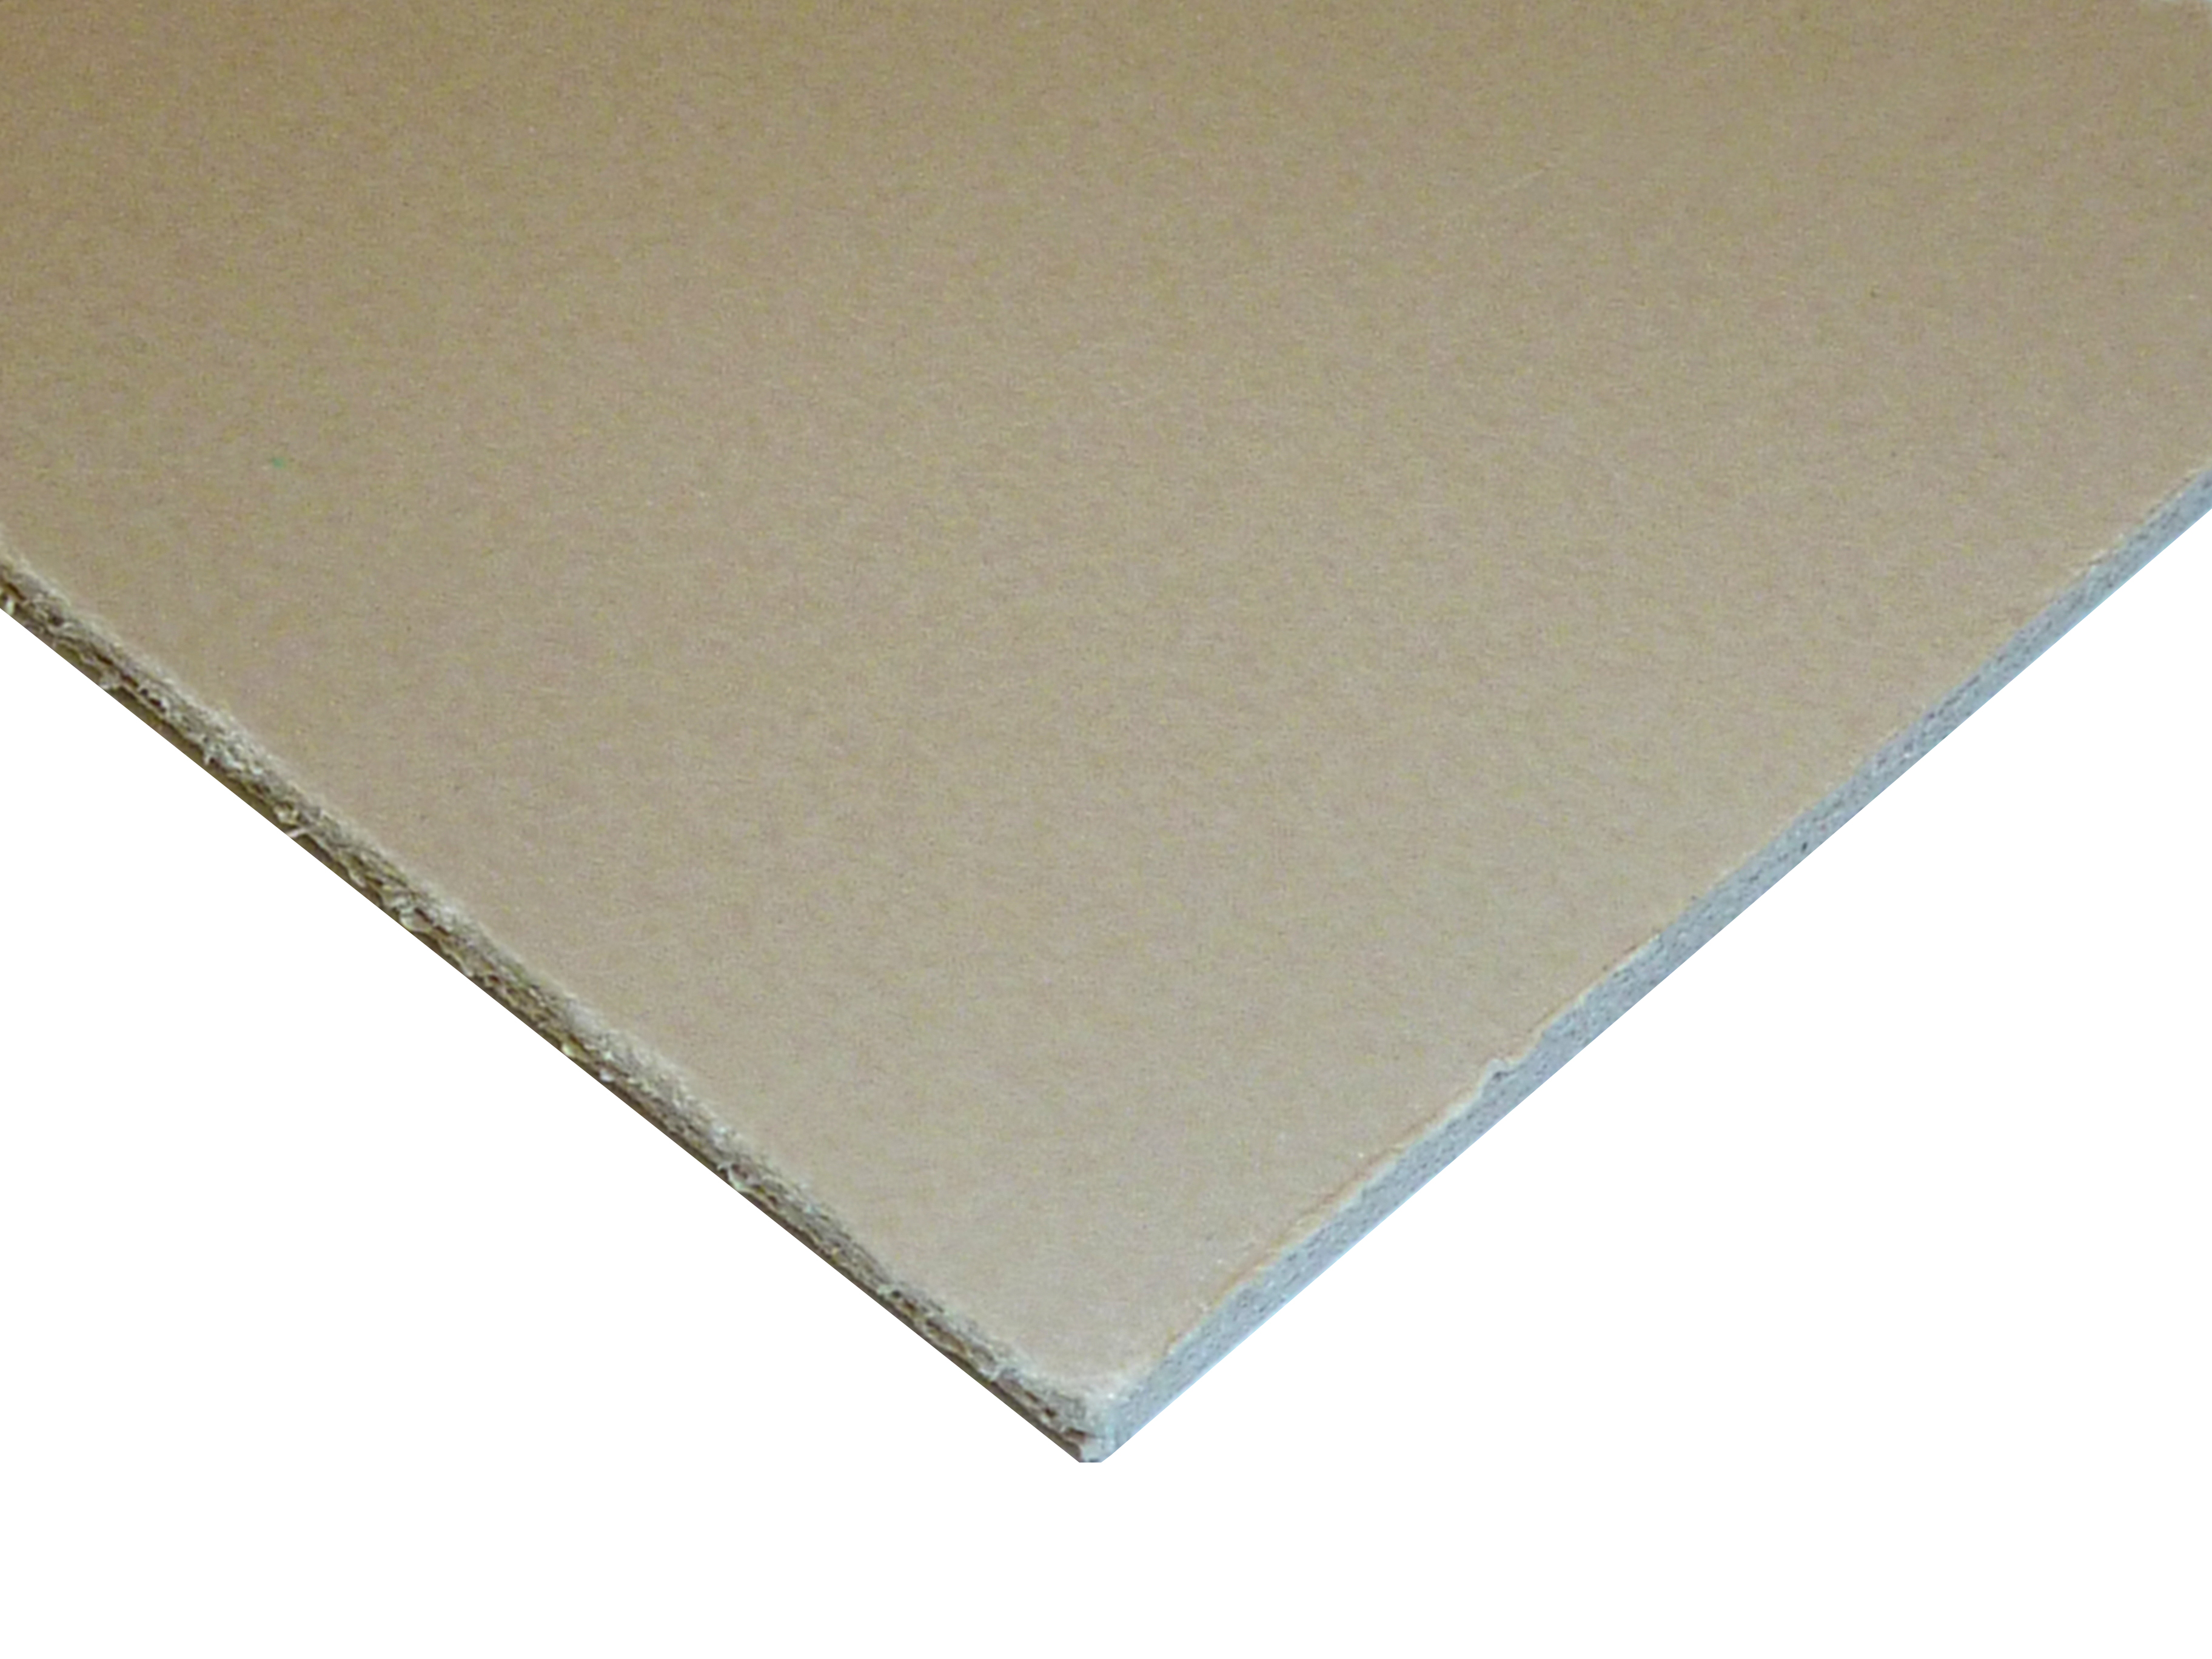 Blue 6mm Thick Satin Smooth Finish Celtec Expanded PVC Sheet 12 Length x 12 Width 